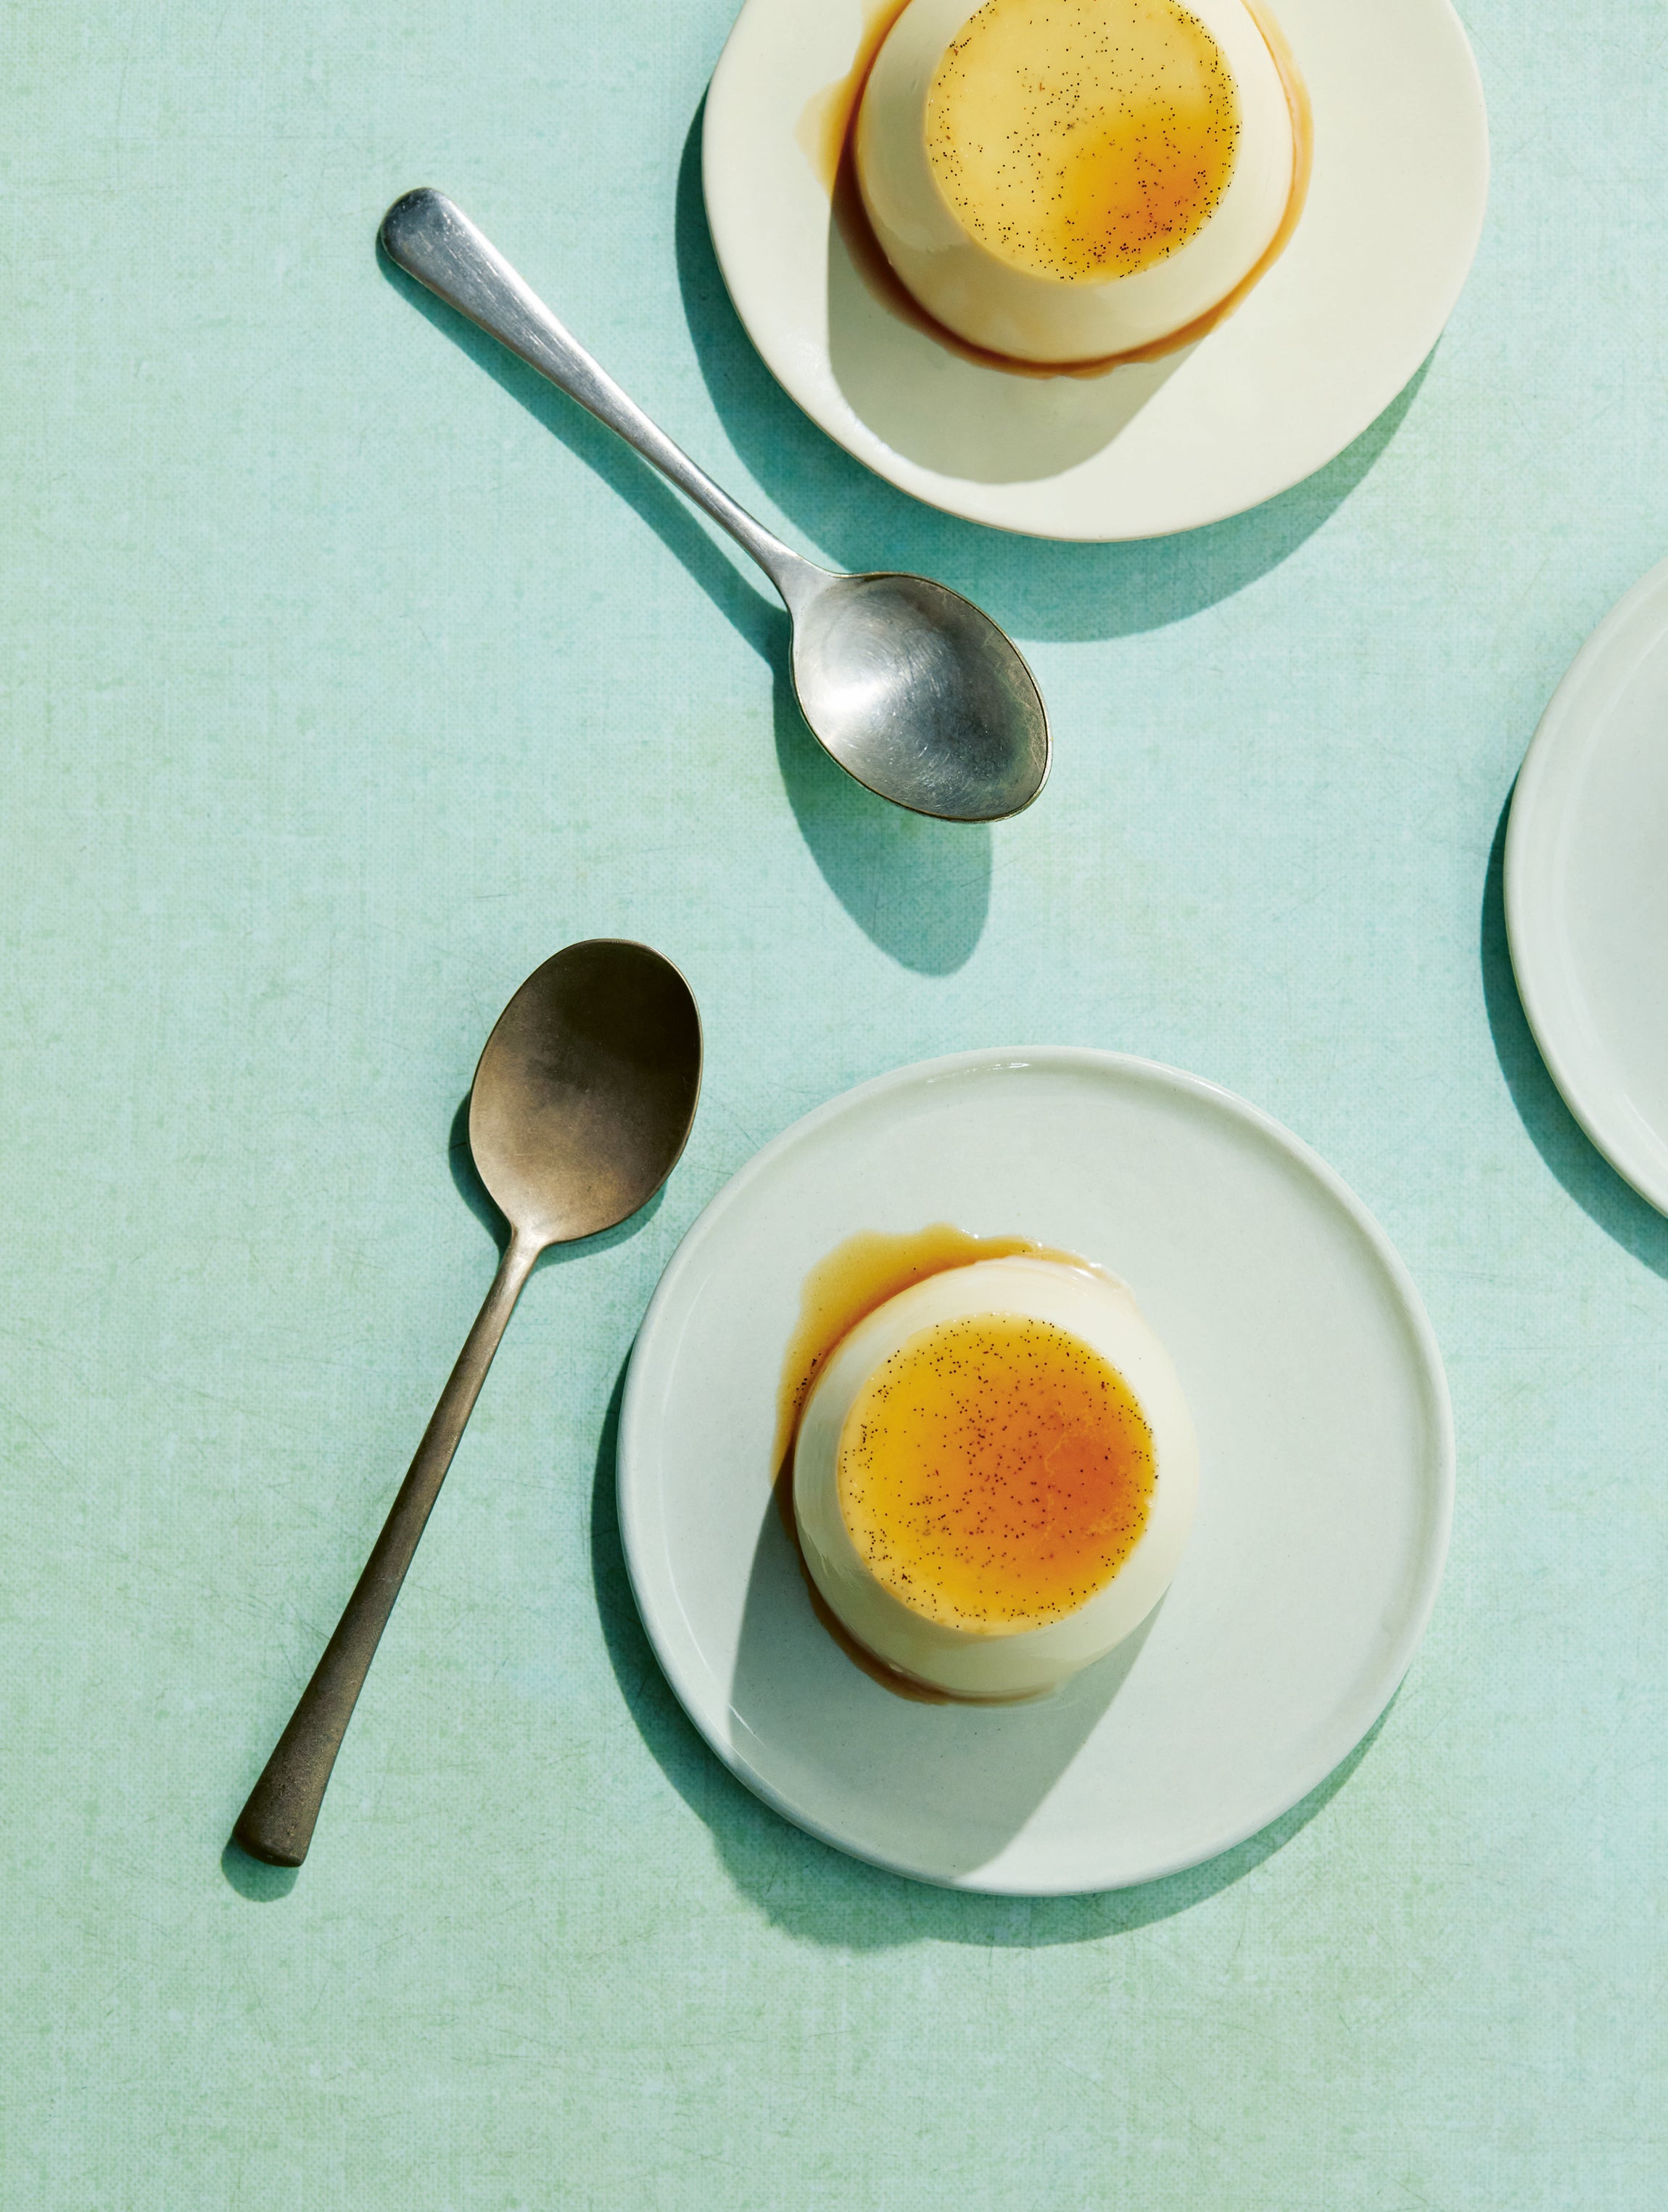 A boozy dessert to round off any Italian meal